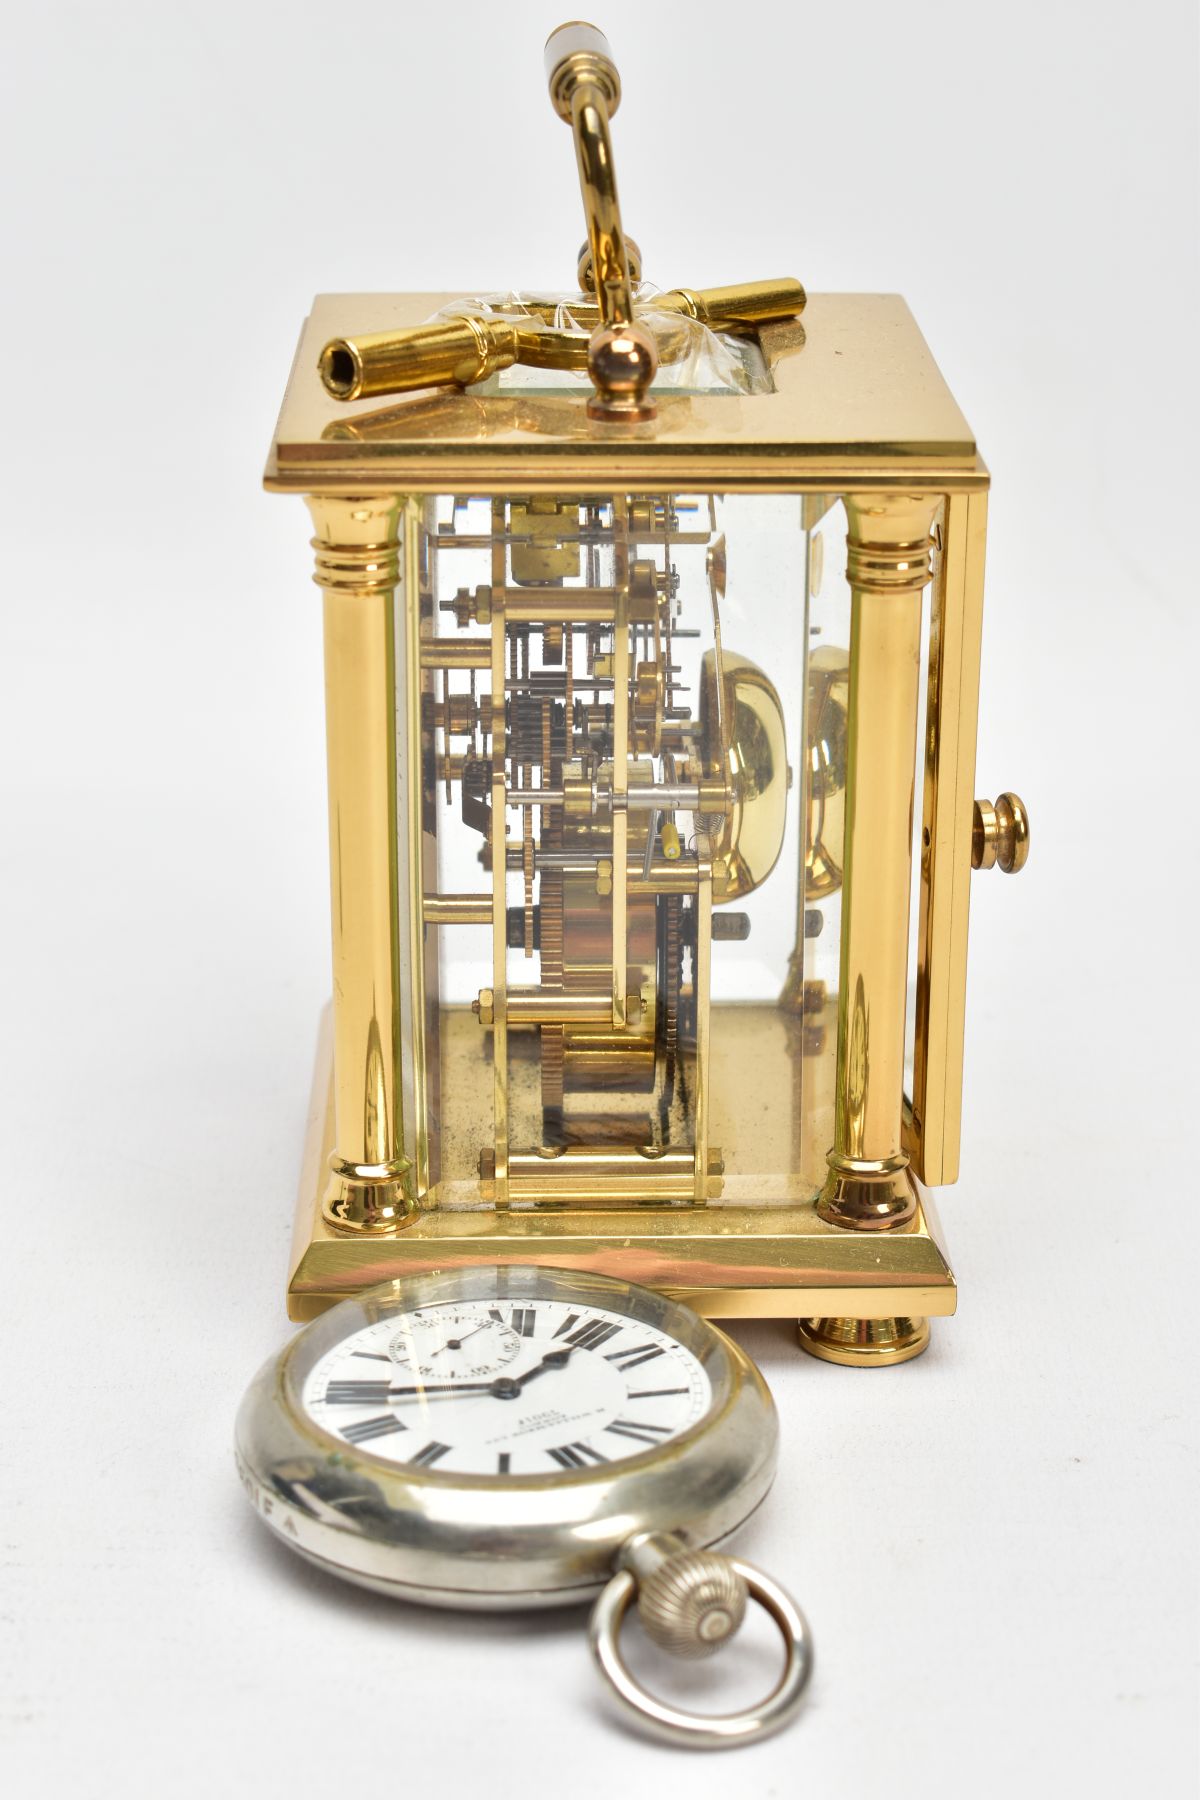 A BRASS CARRIAGE CLOCK AND A MILITARY POCKET WATCH, a white enamel face with black Roman numerals, - Image 3 of 7